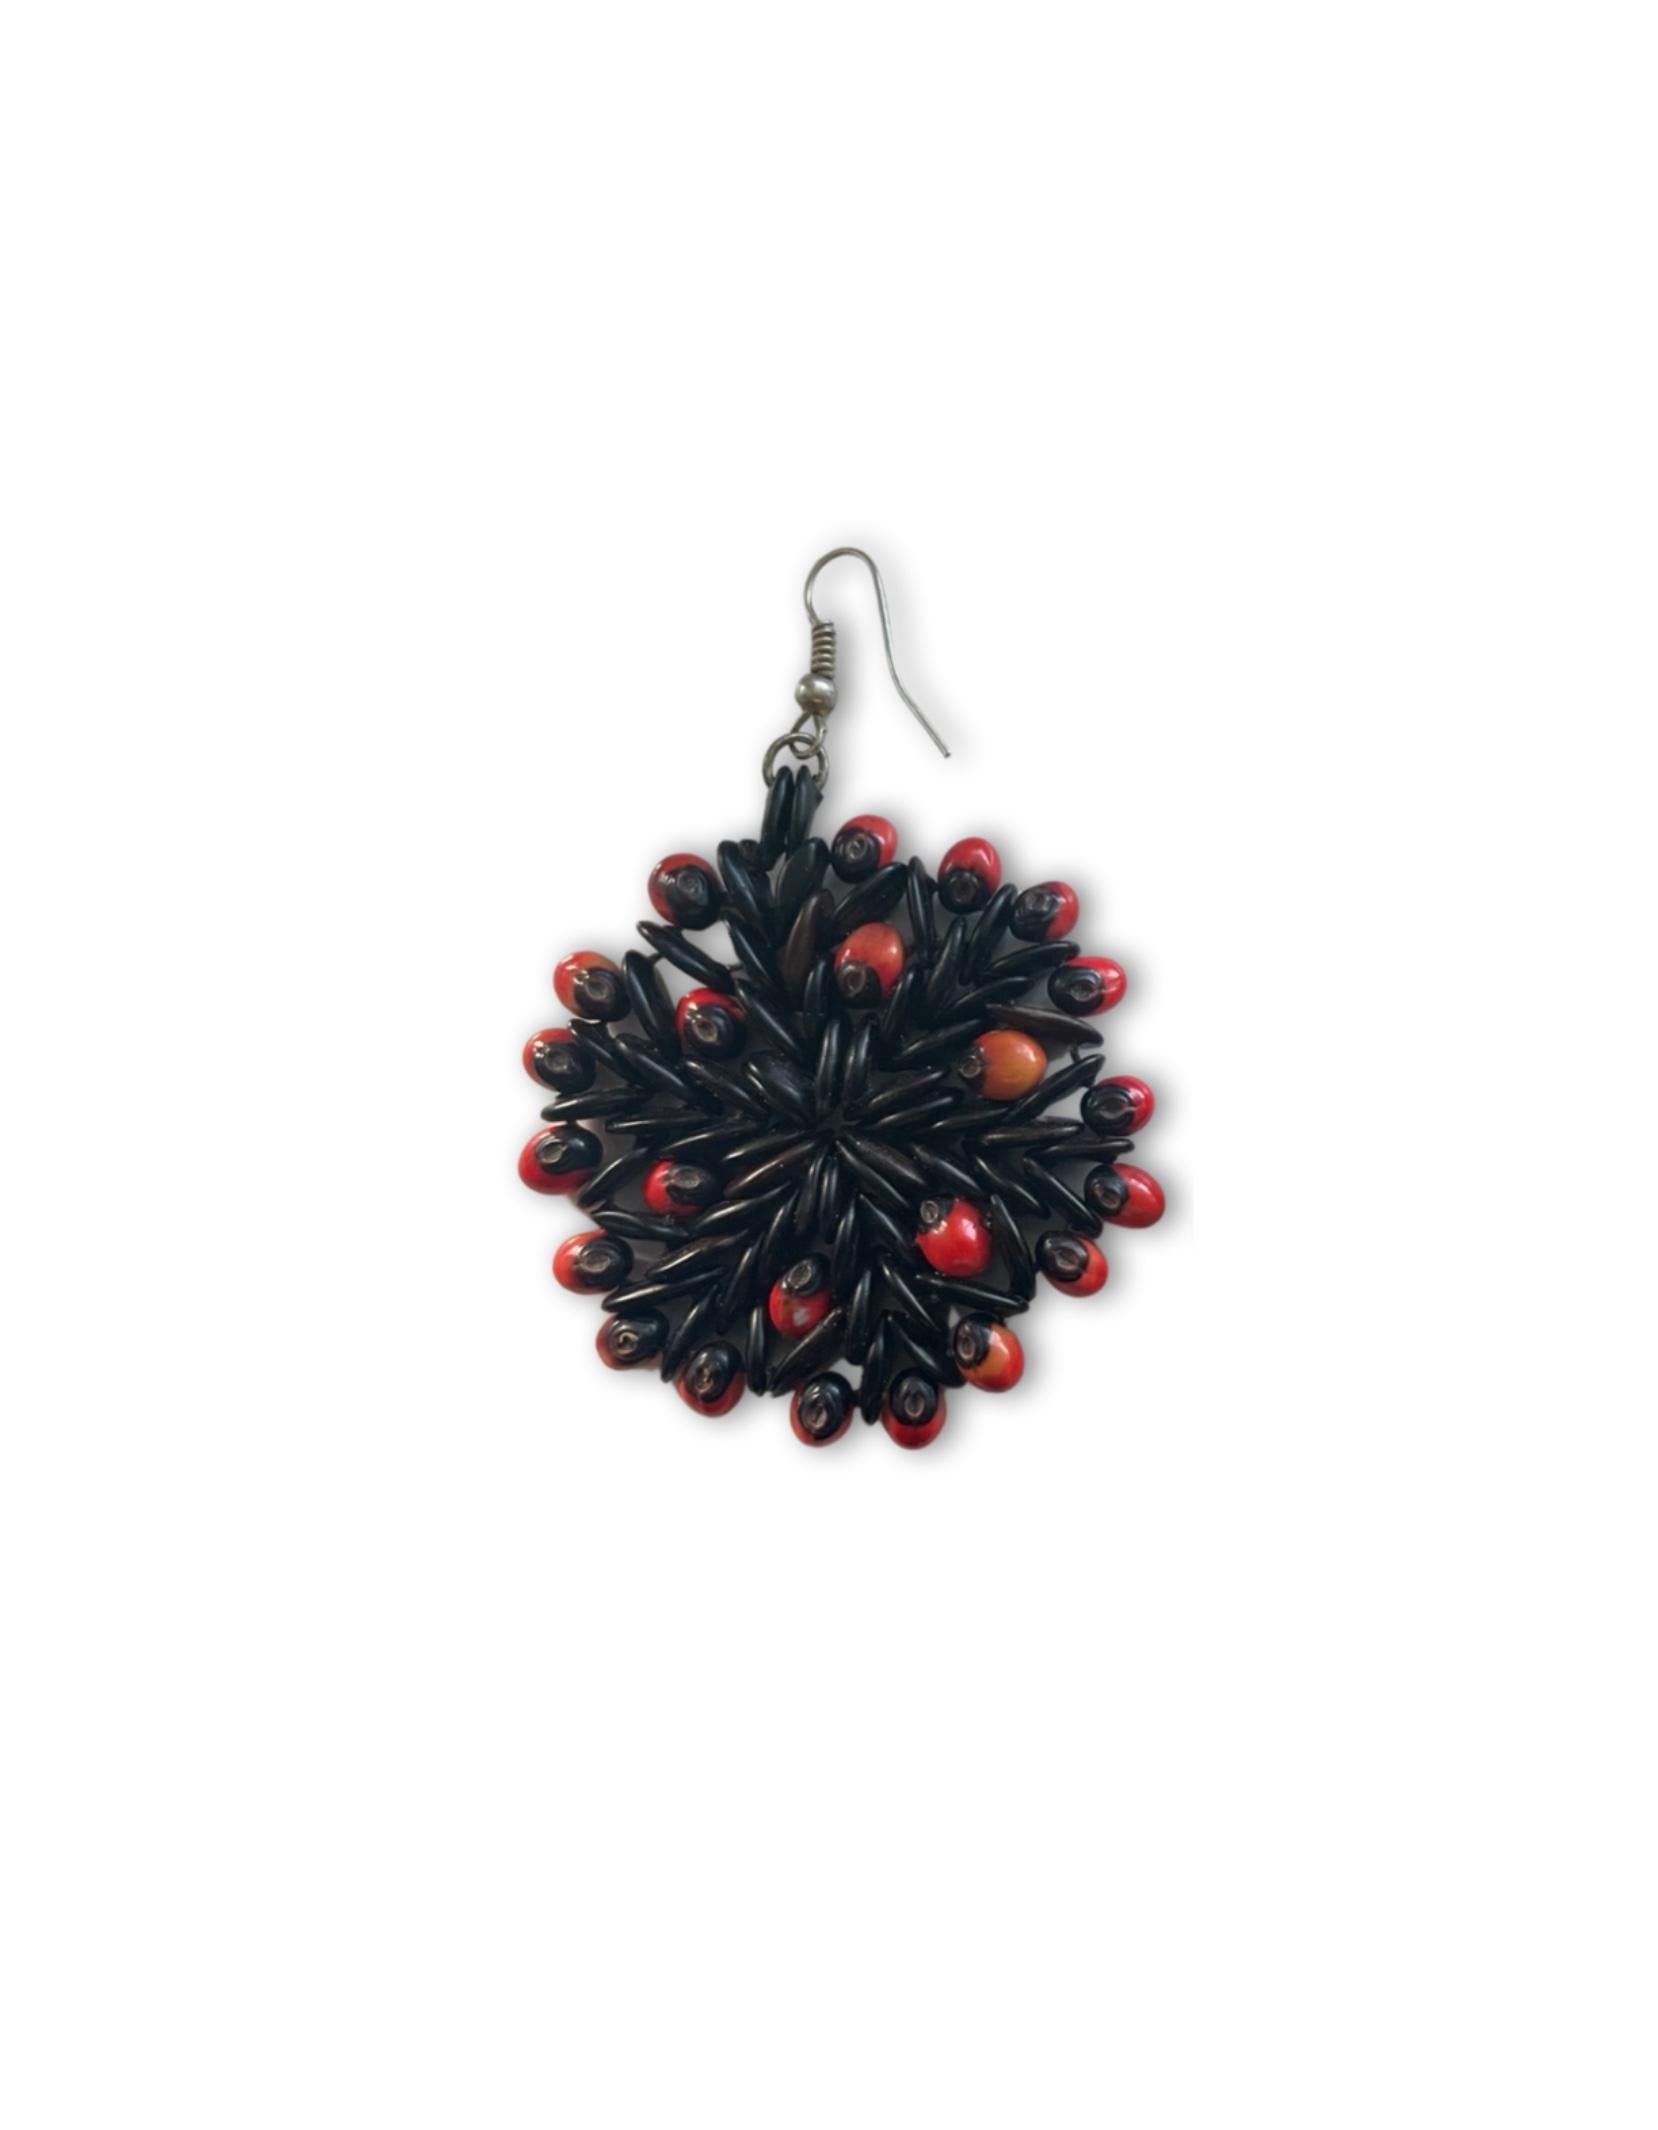 Capturing the mixture of tradition and vibrancy, this wild tamarind seed and jumbie bead seed earring will spark conversation at any cocktail hour. The rotunda design, highlighted with handpicked and Antiguan-sourced red jumbie bead seeds, is